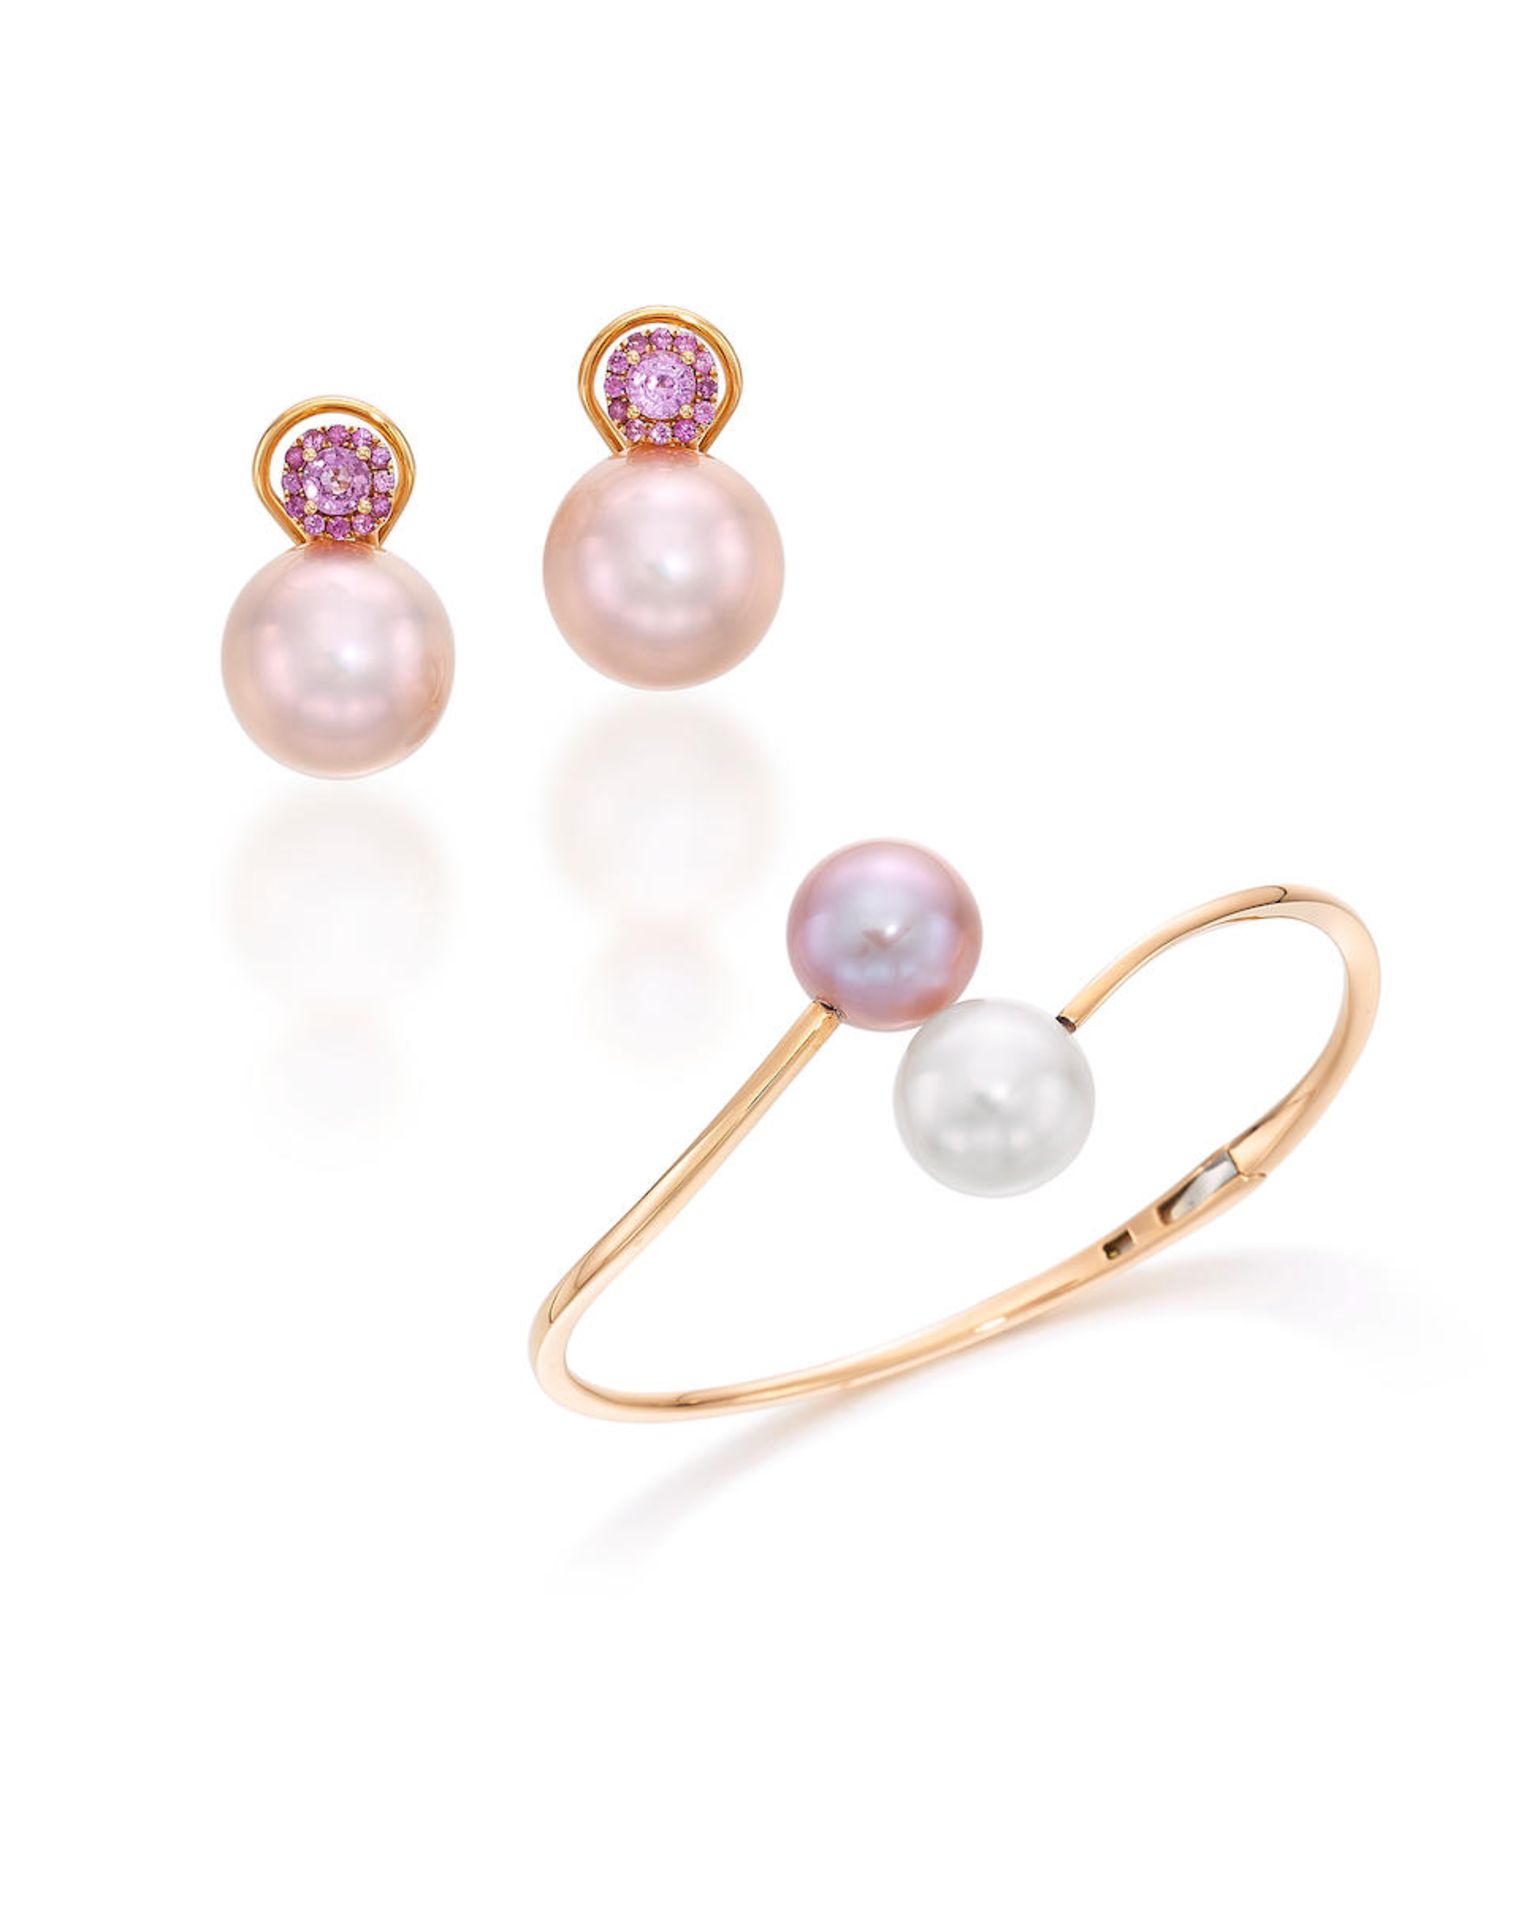 BICOLOURED CULTURED PEARL CROSSOVER BANGLE, AND PAIR OF PINK CULTURED PEARL AND PINK SAPPHIRE EA...